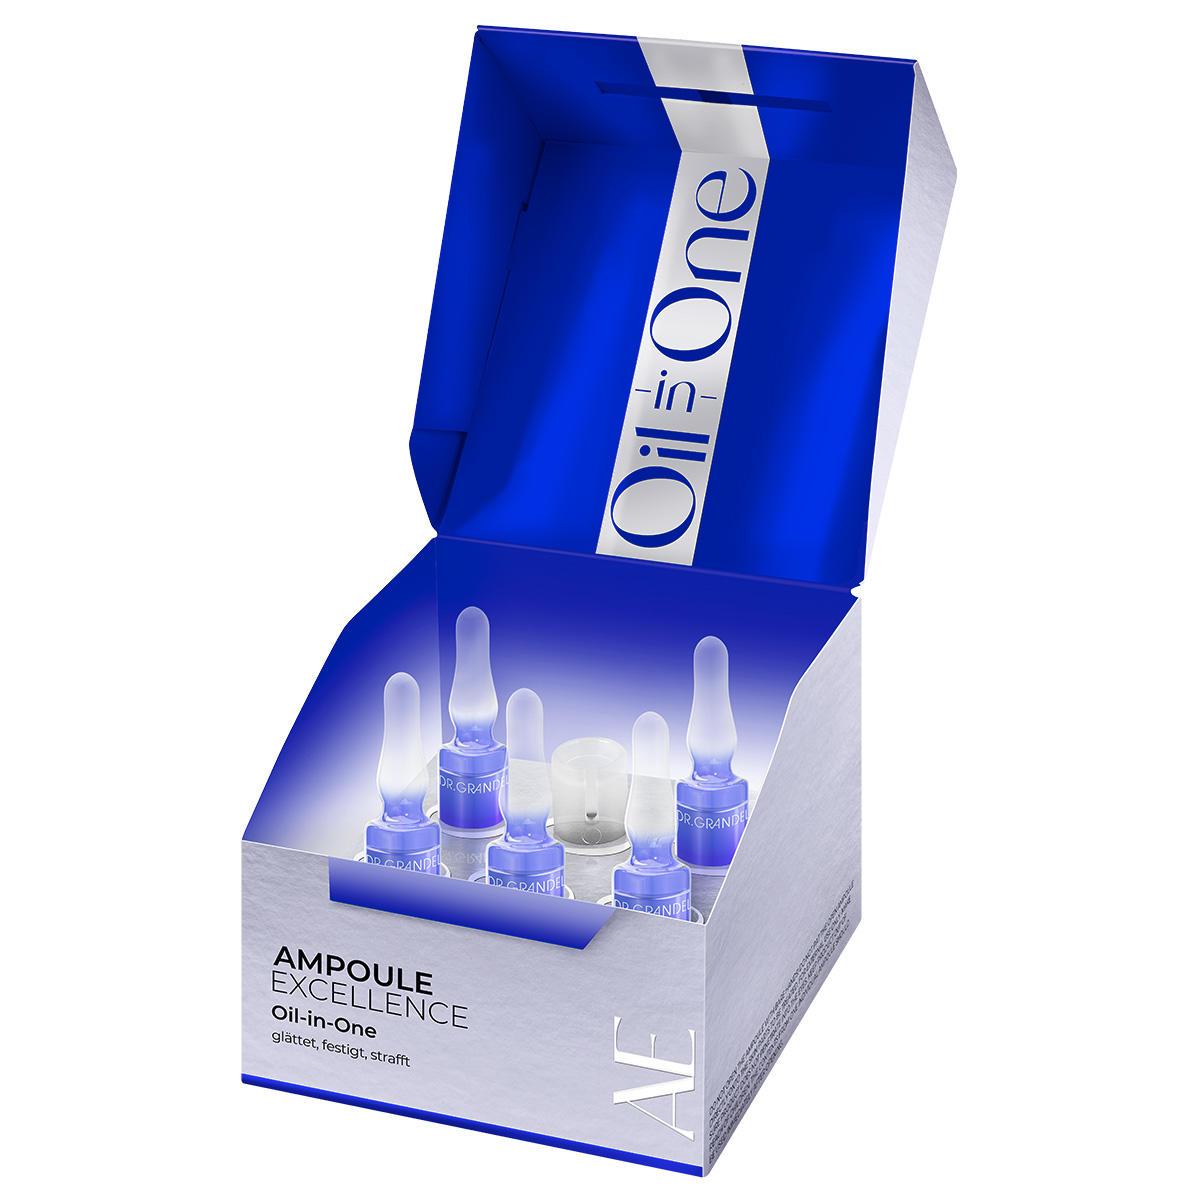 DR. GRANDEL AMPOULE EXCELLENCE Oil-in-One 5 x 3 ml - 2